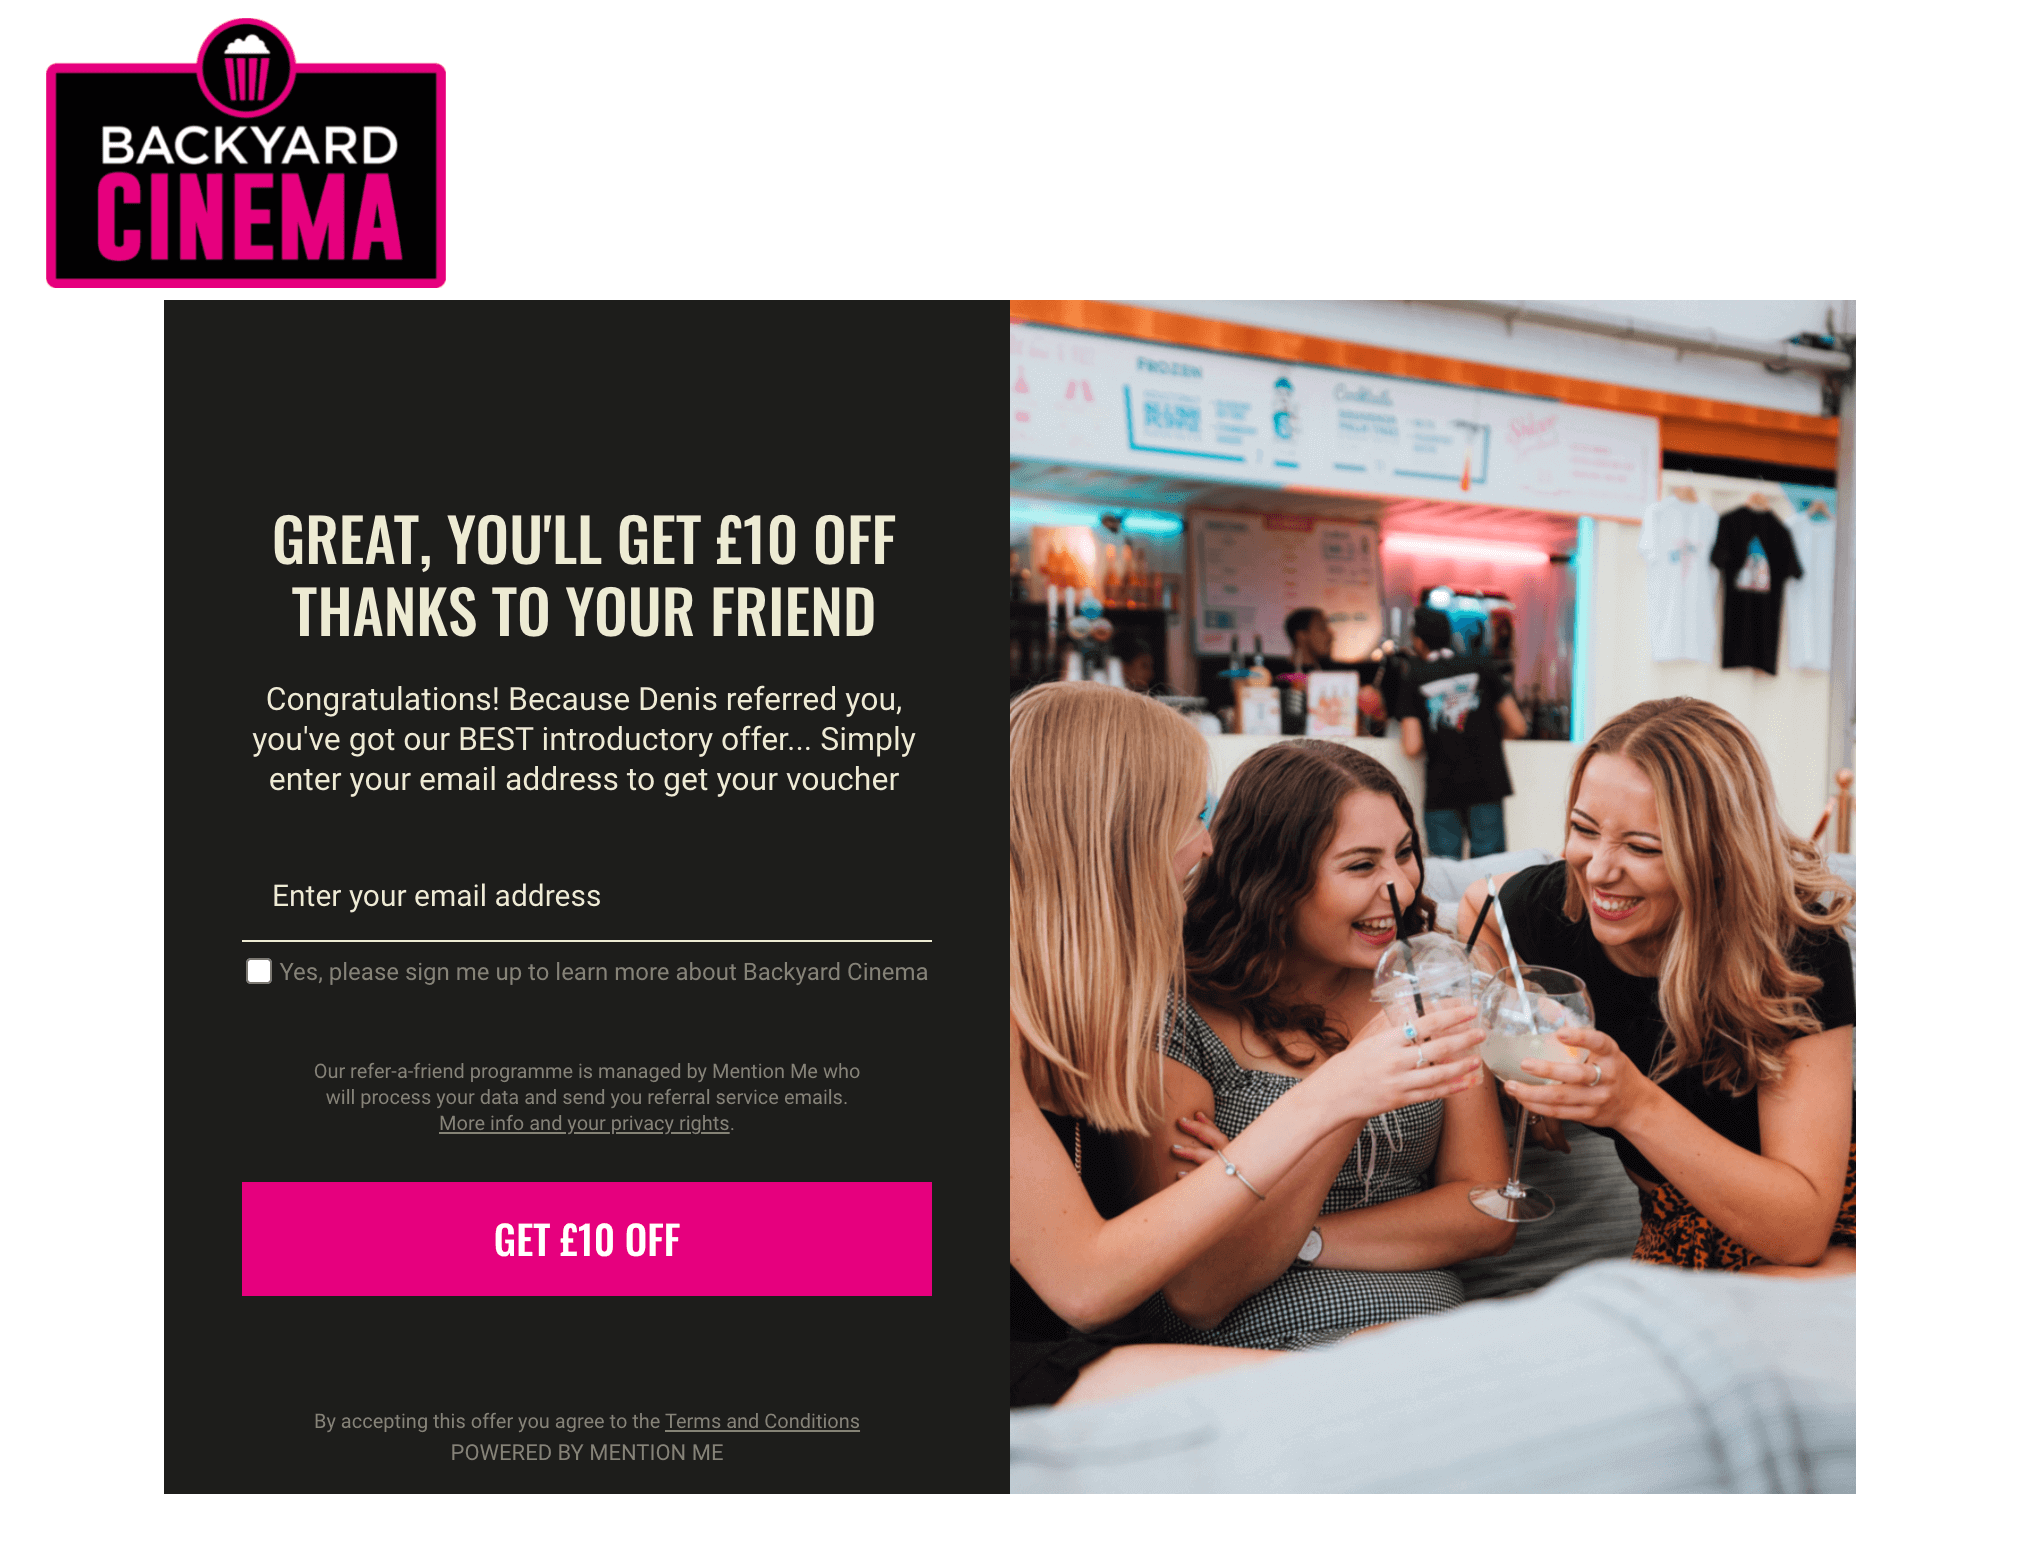 backyard cinema-referral discount code london refer friend coupon offer 2021